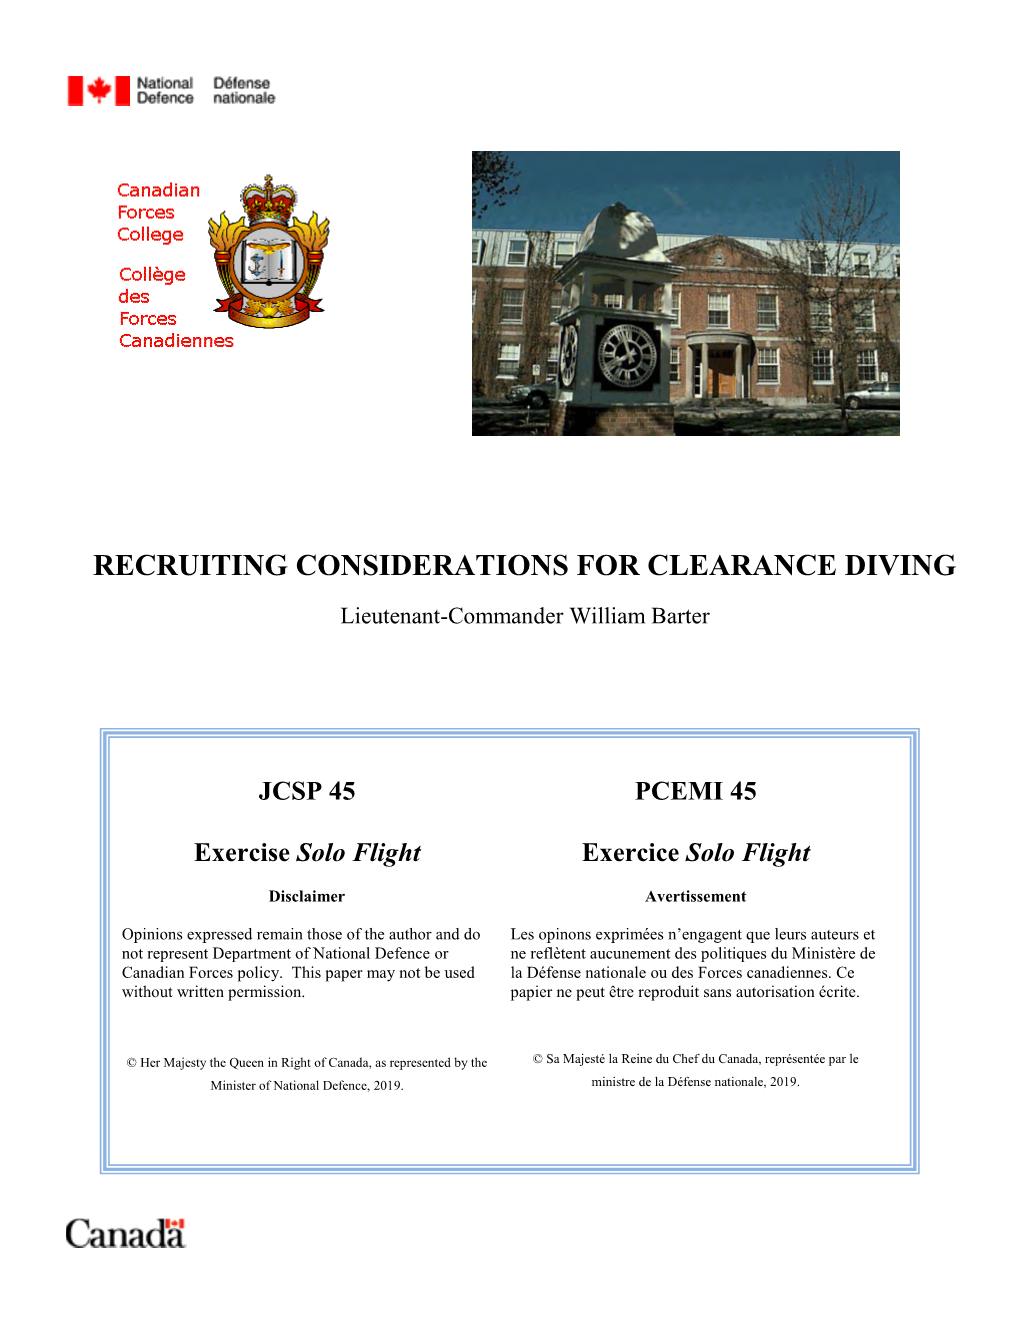 Recruiting Considerations for Clearance Diving